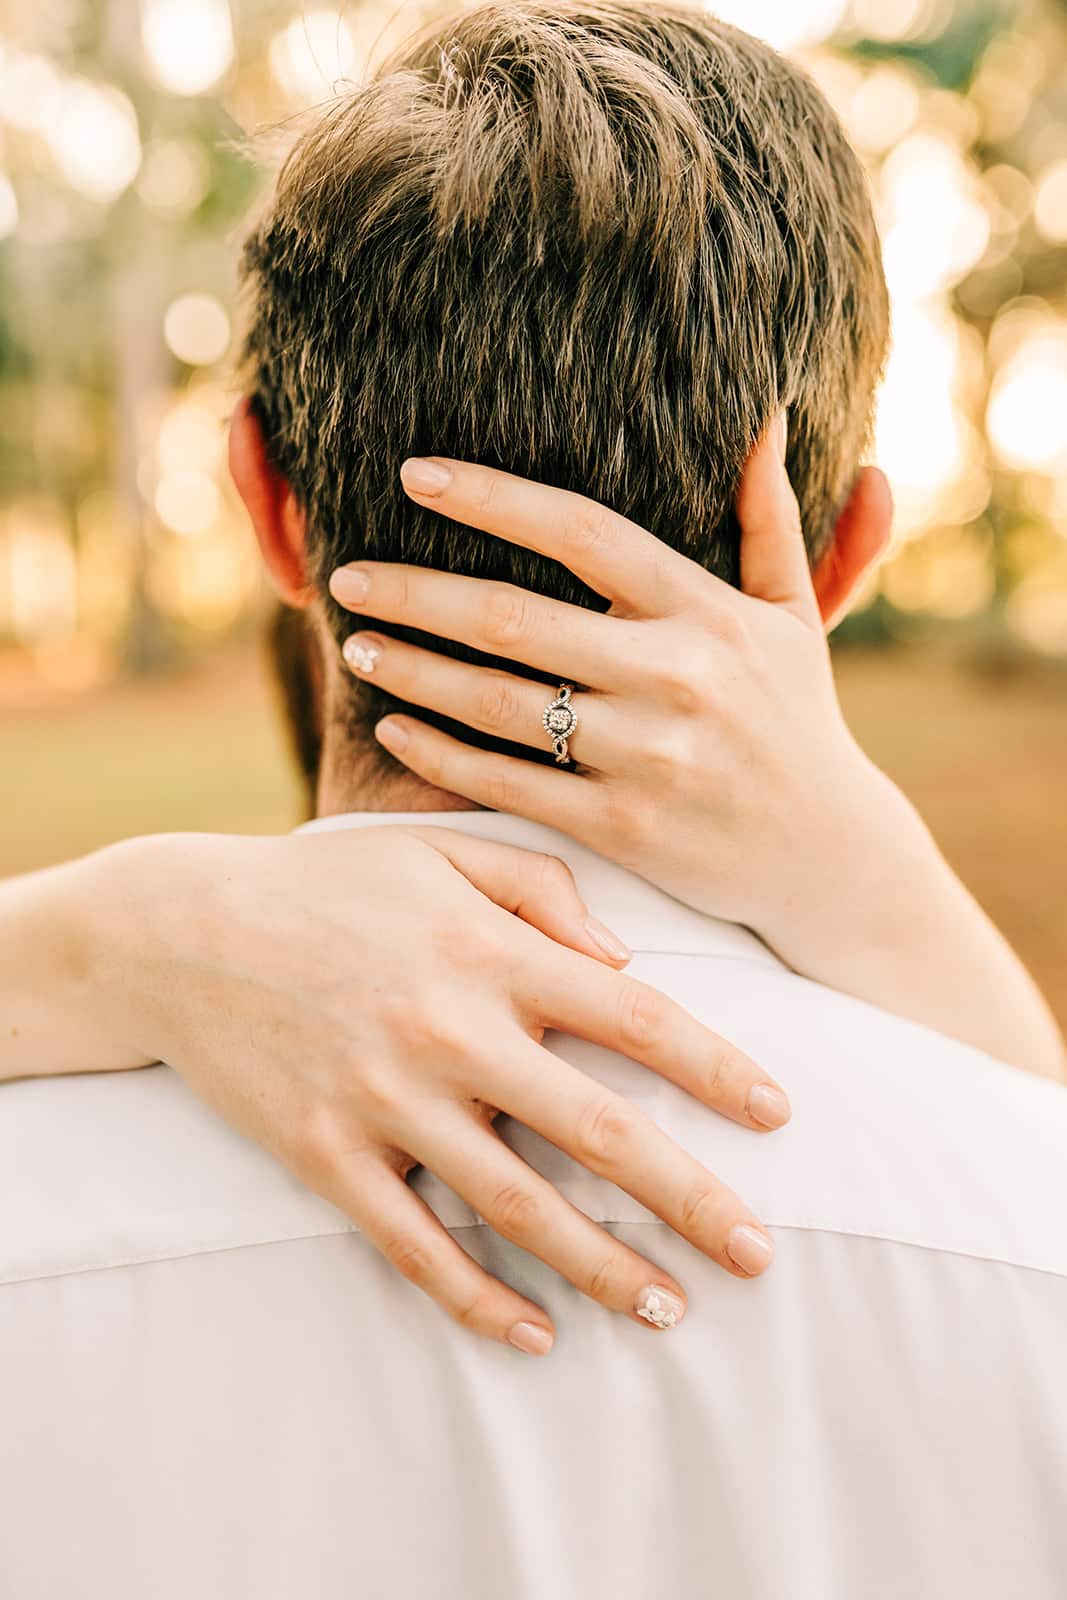 man and woman engagement pictures outside at park close up of woman's hands around neck of man